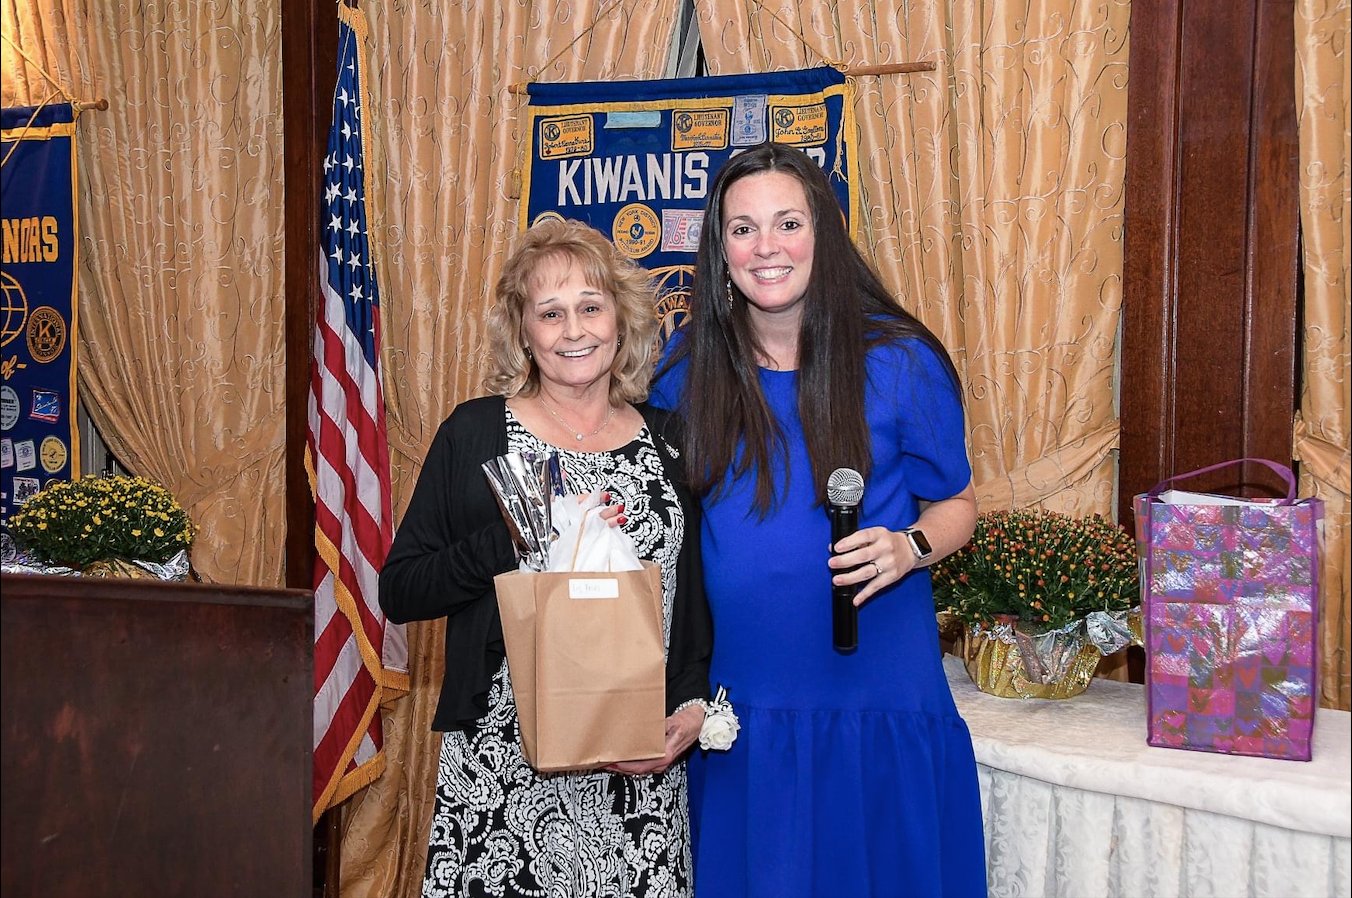 Liz Fries, Kiwanis Club’s Long Island South Central Division lieutenant governor,  left, with Jennifer Reinhardt, the East Meadow Kiwanis president.